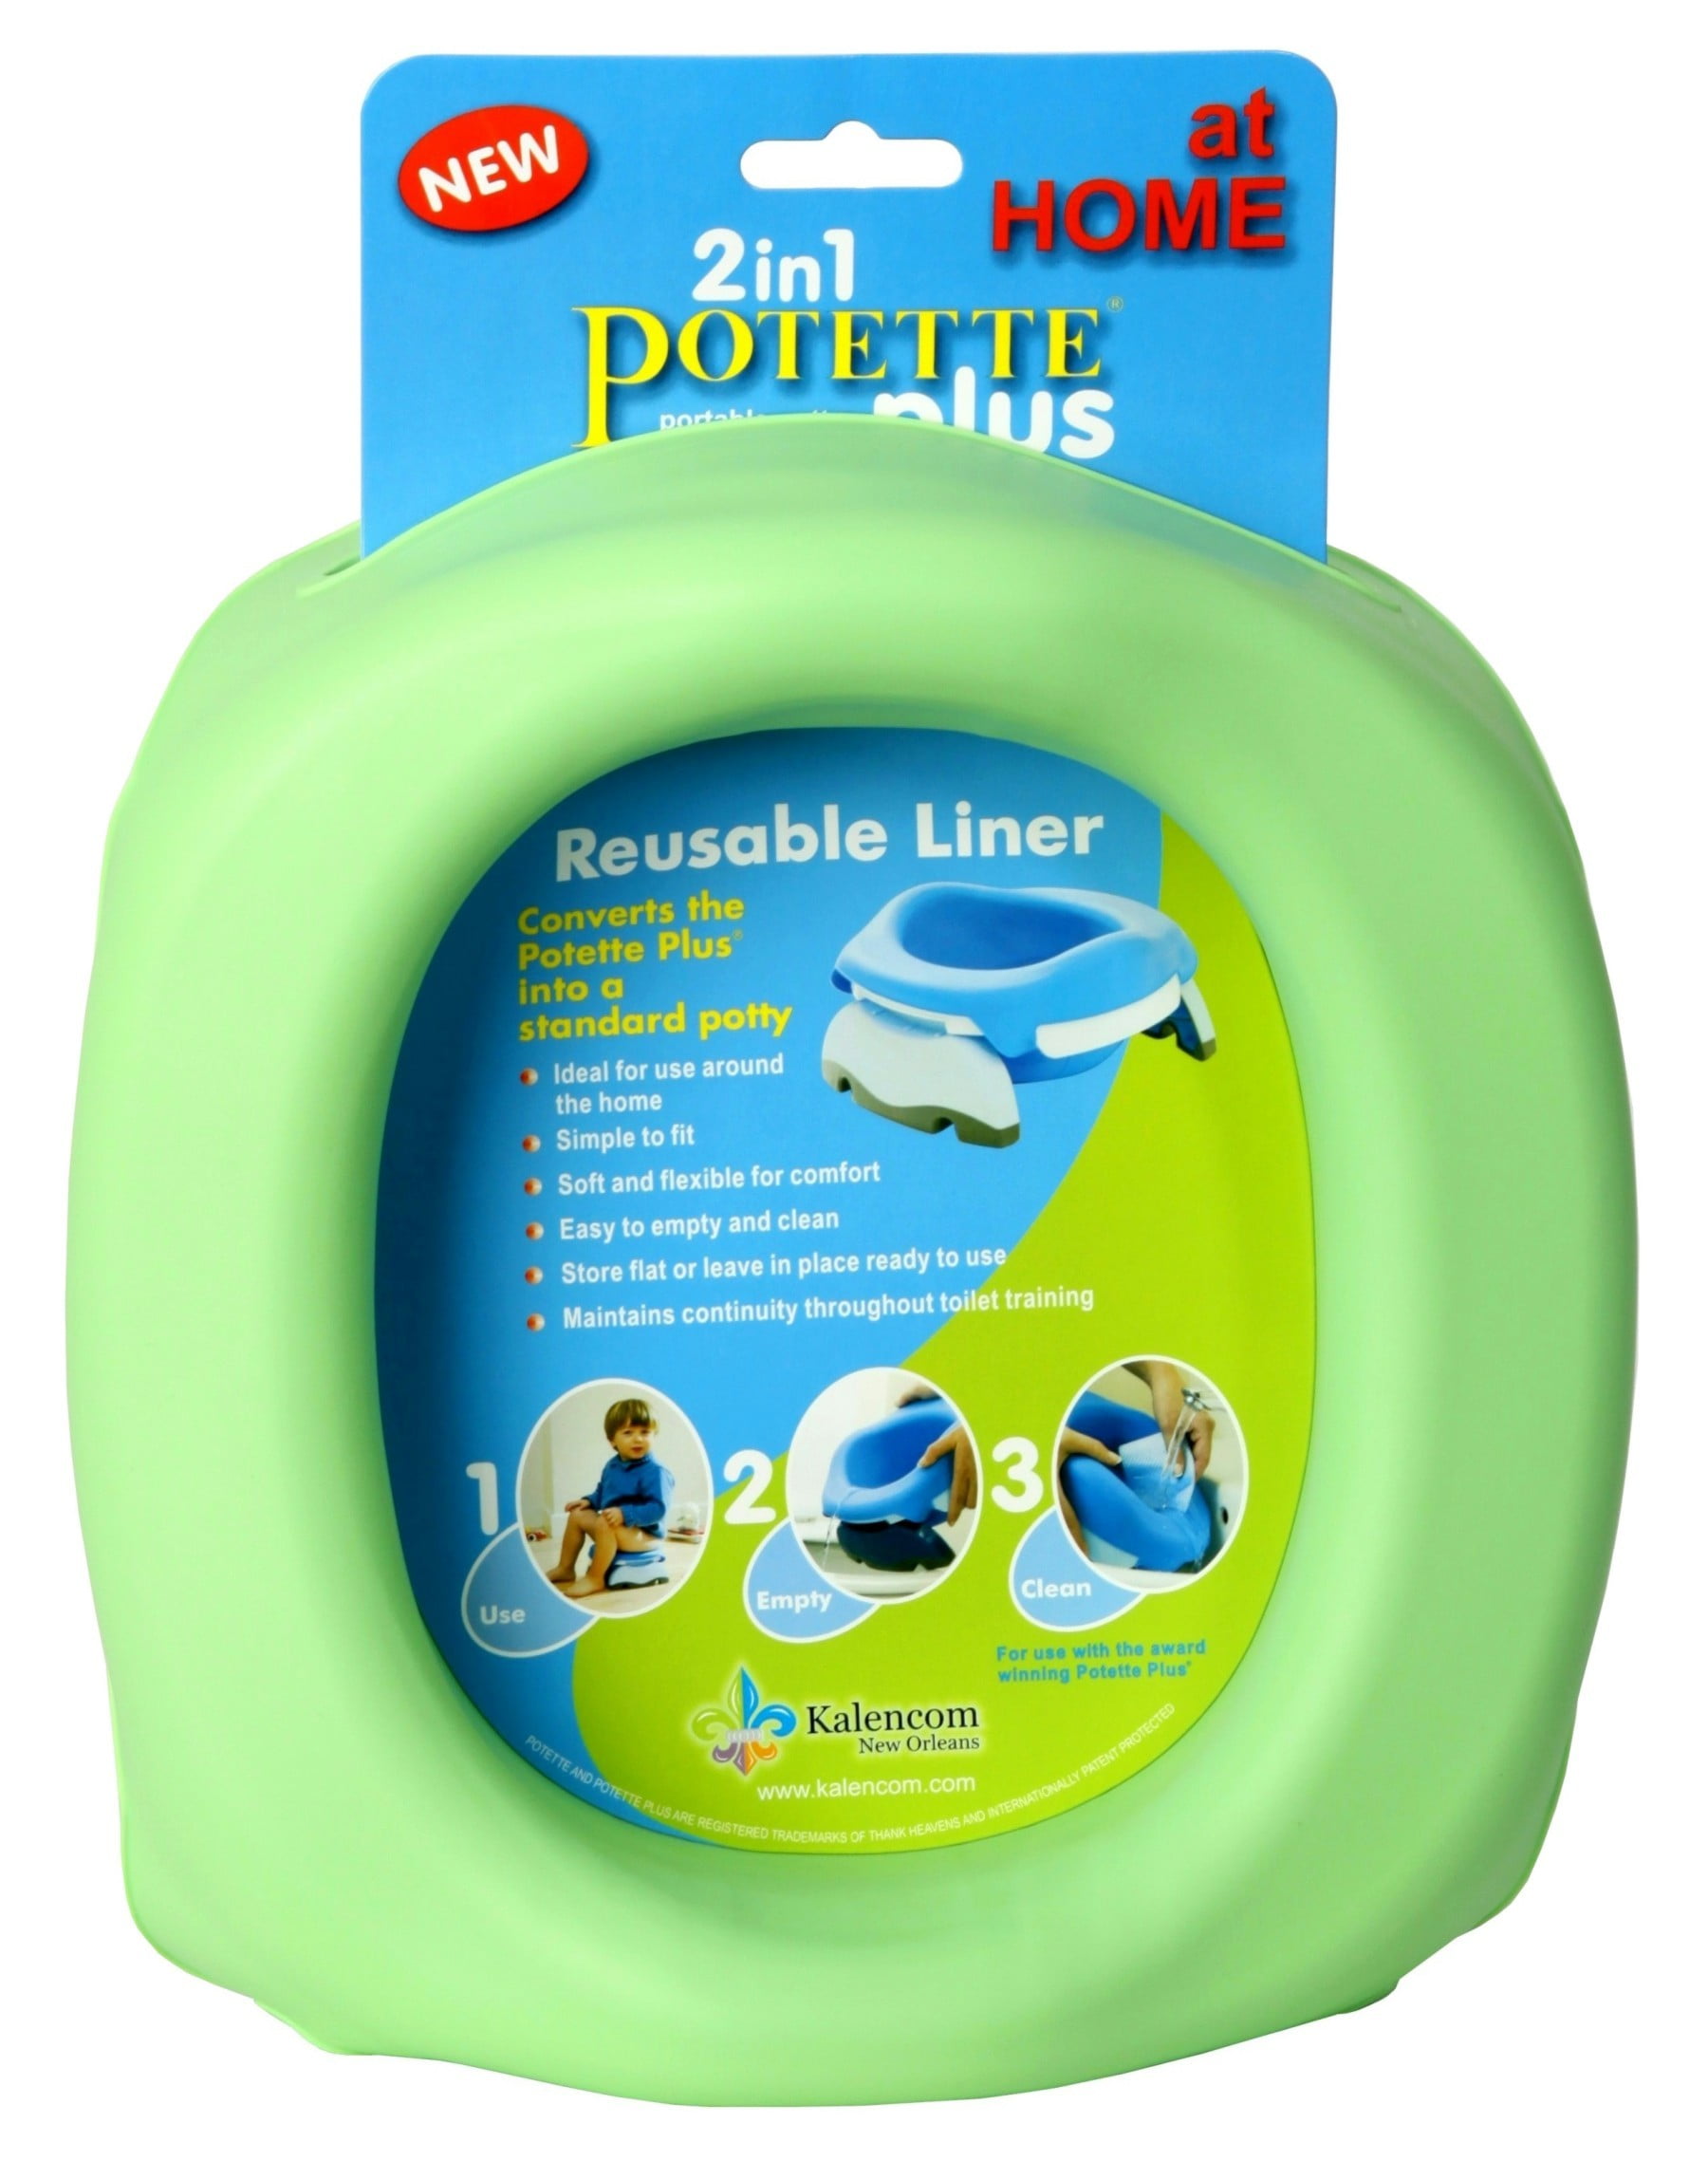 Fold Flat Easy to Clean Reusable Liner to fit Potette Plus Travel Potty GREY 